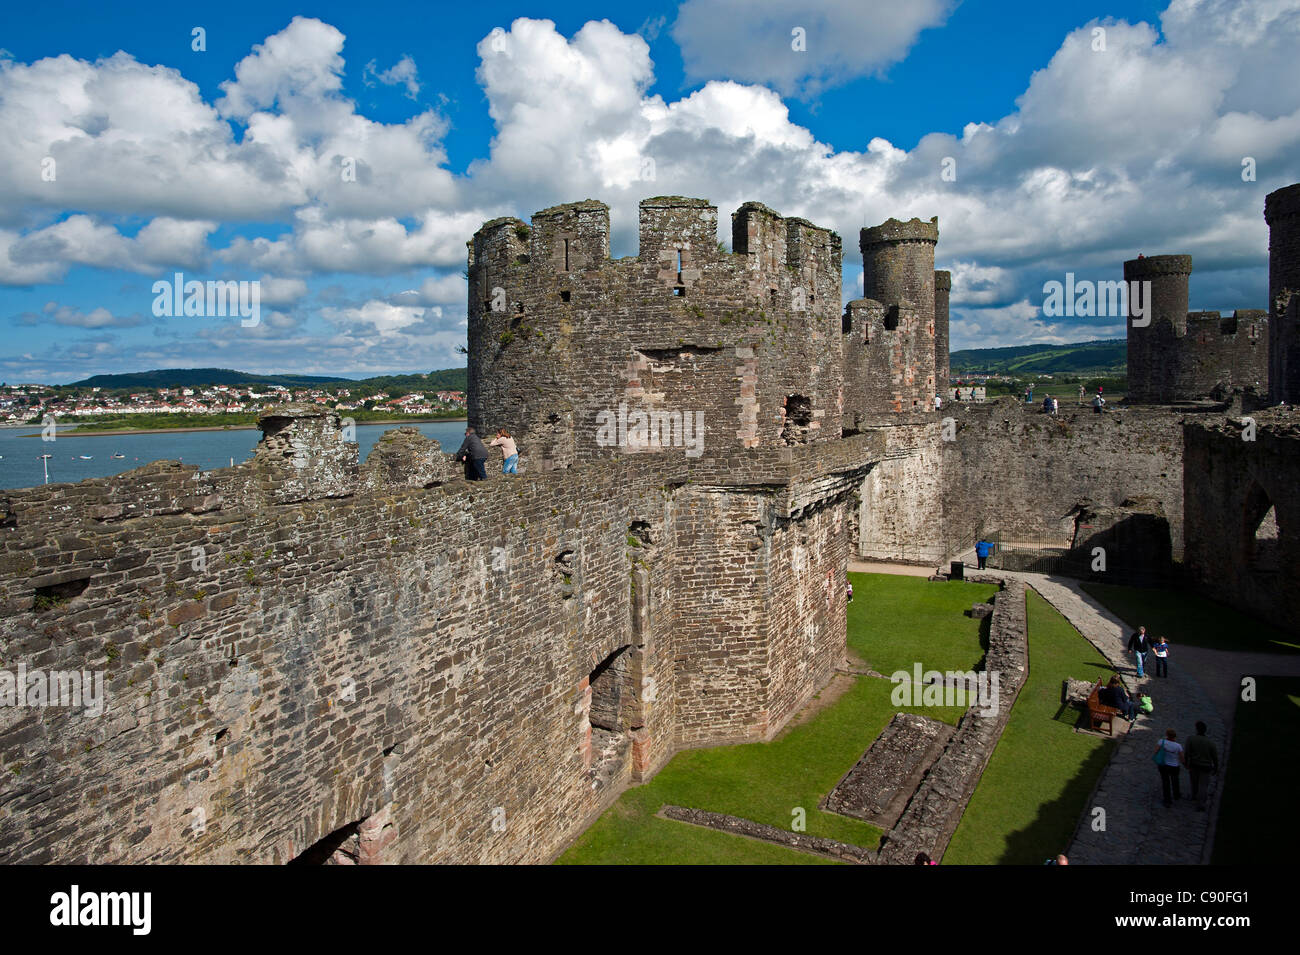 Conwy Castle in Conwy, Wales, UK Stockfoto